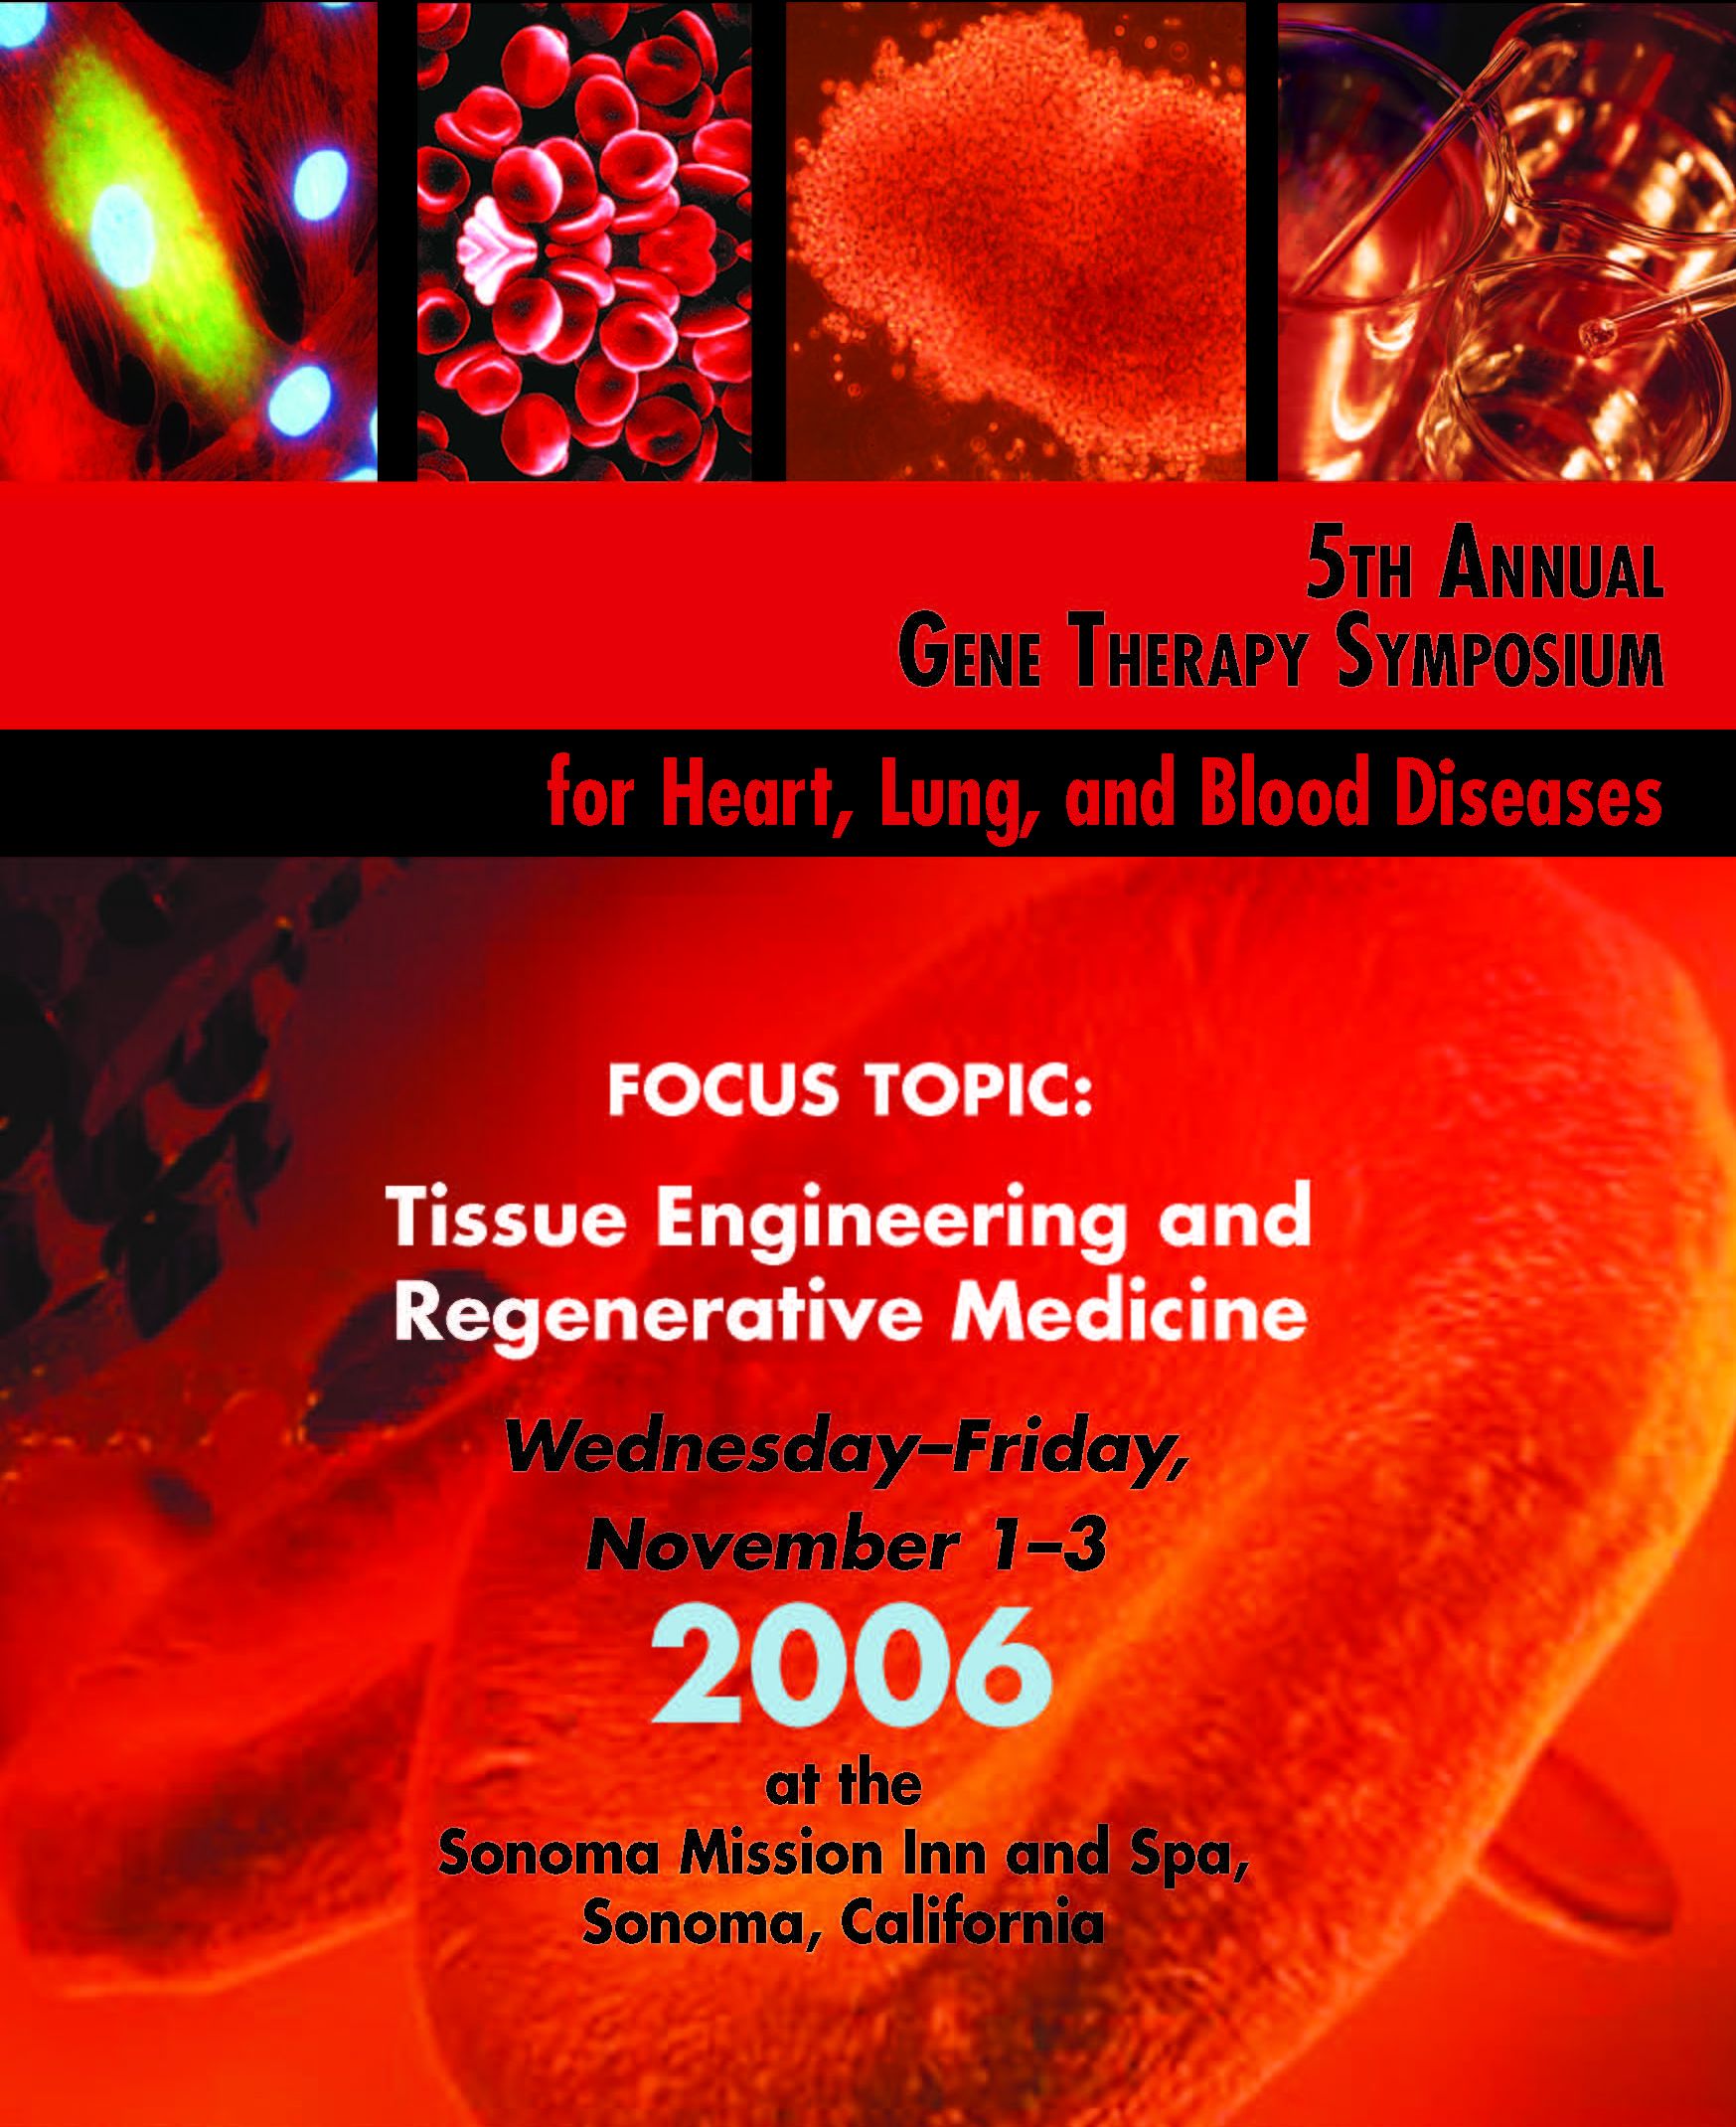 5th Annual Gene Therapy Symposium Poster